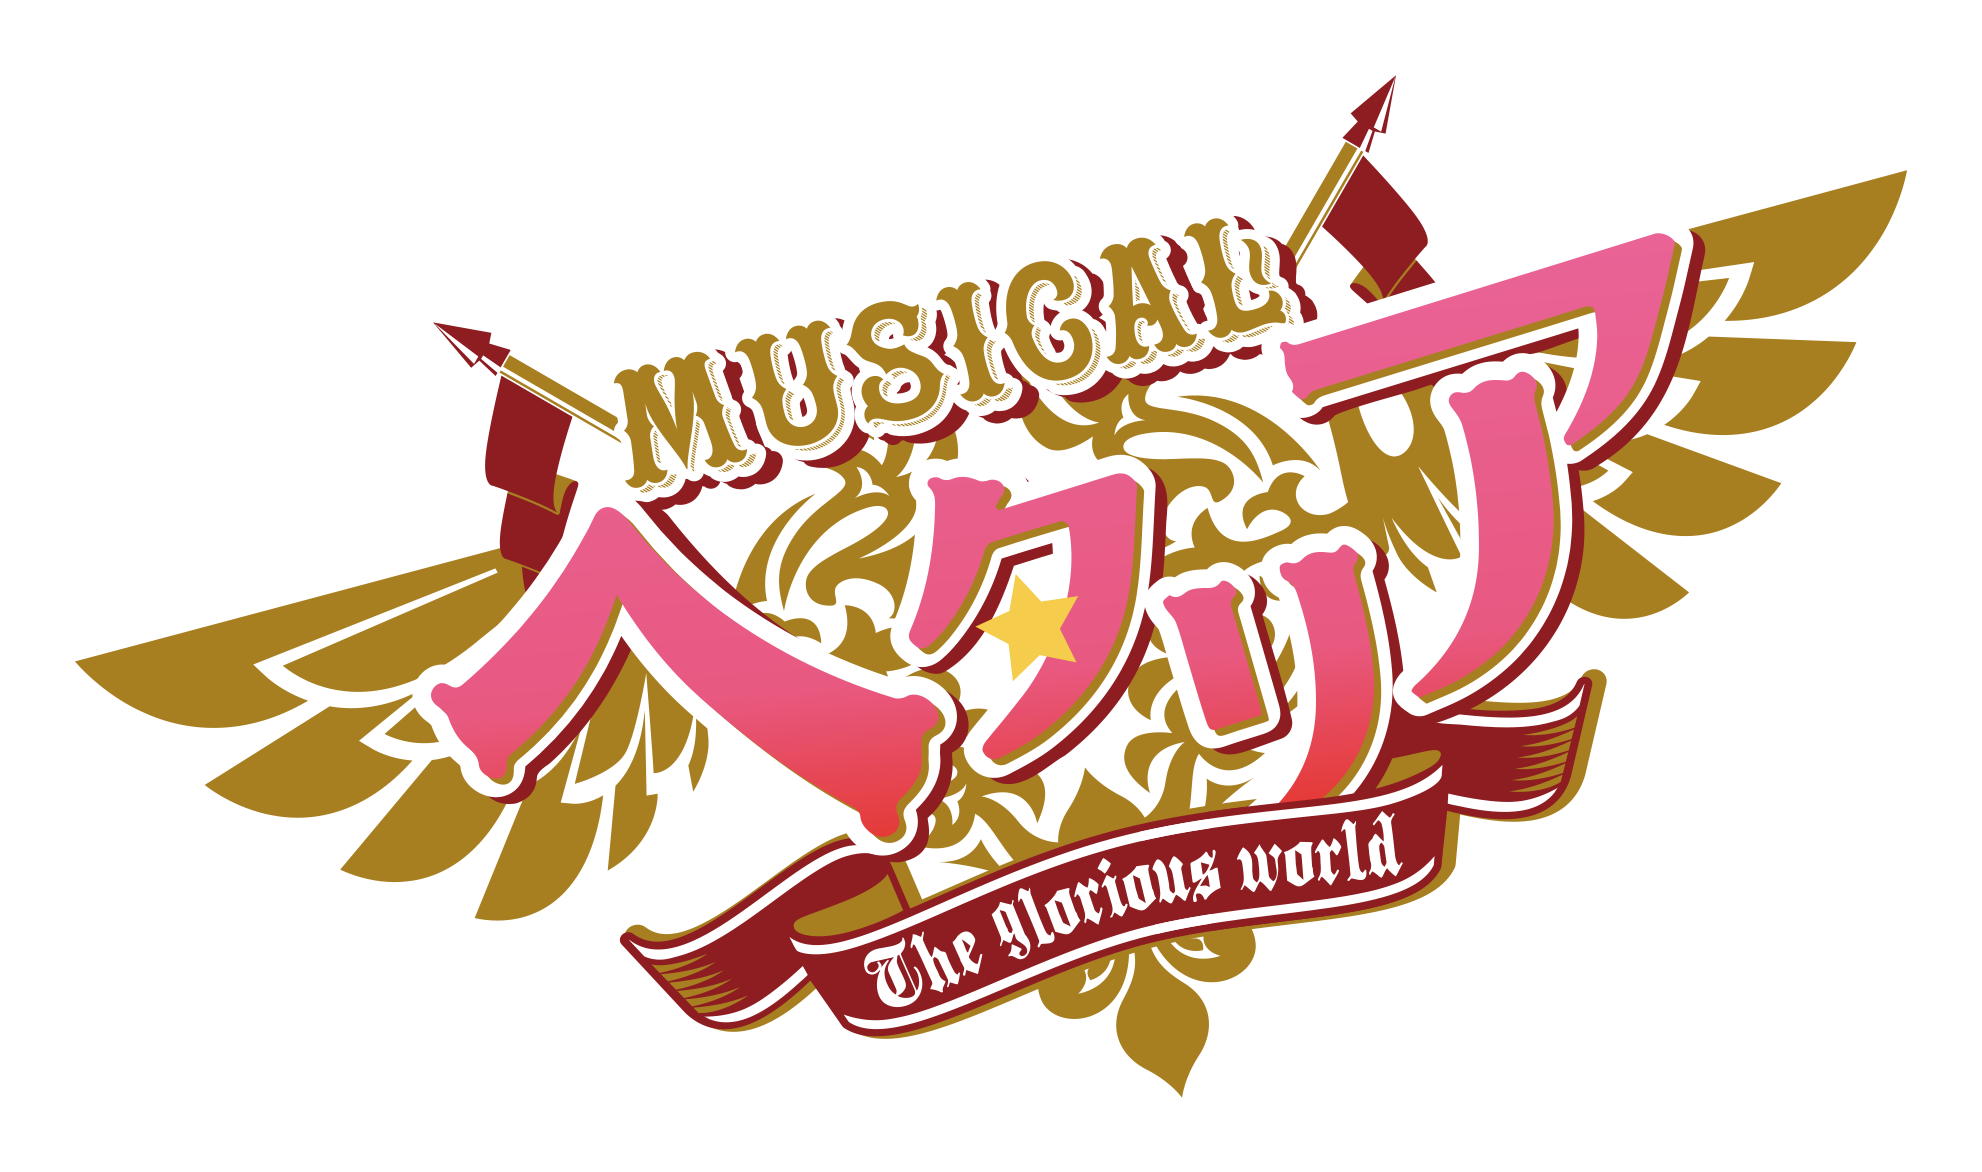 MUSICAL ヘタリア The Glorious World